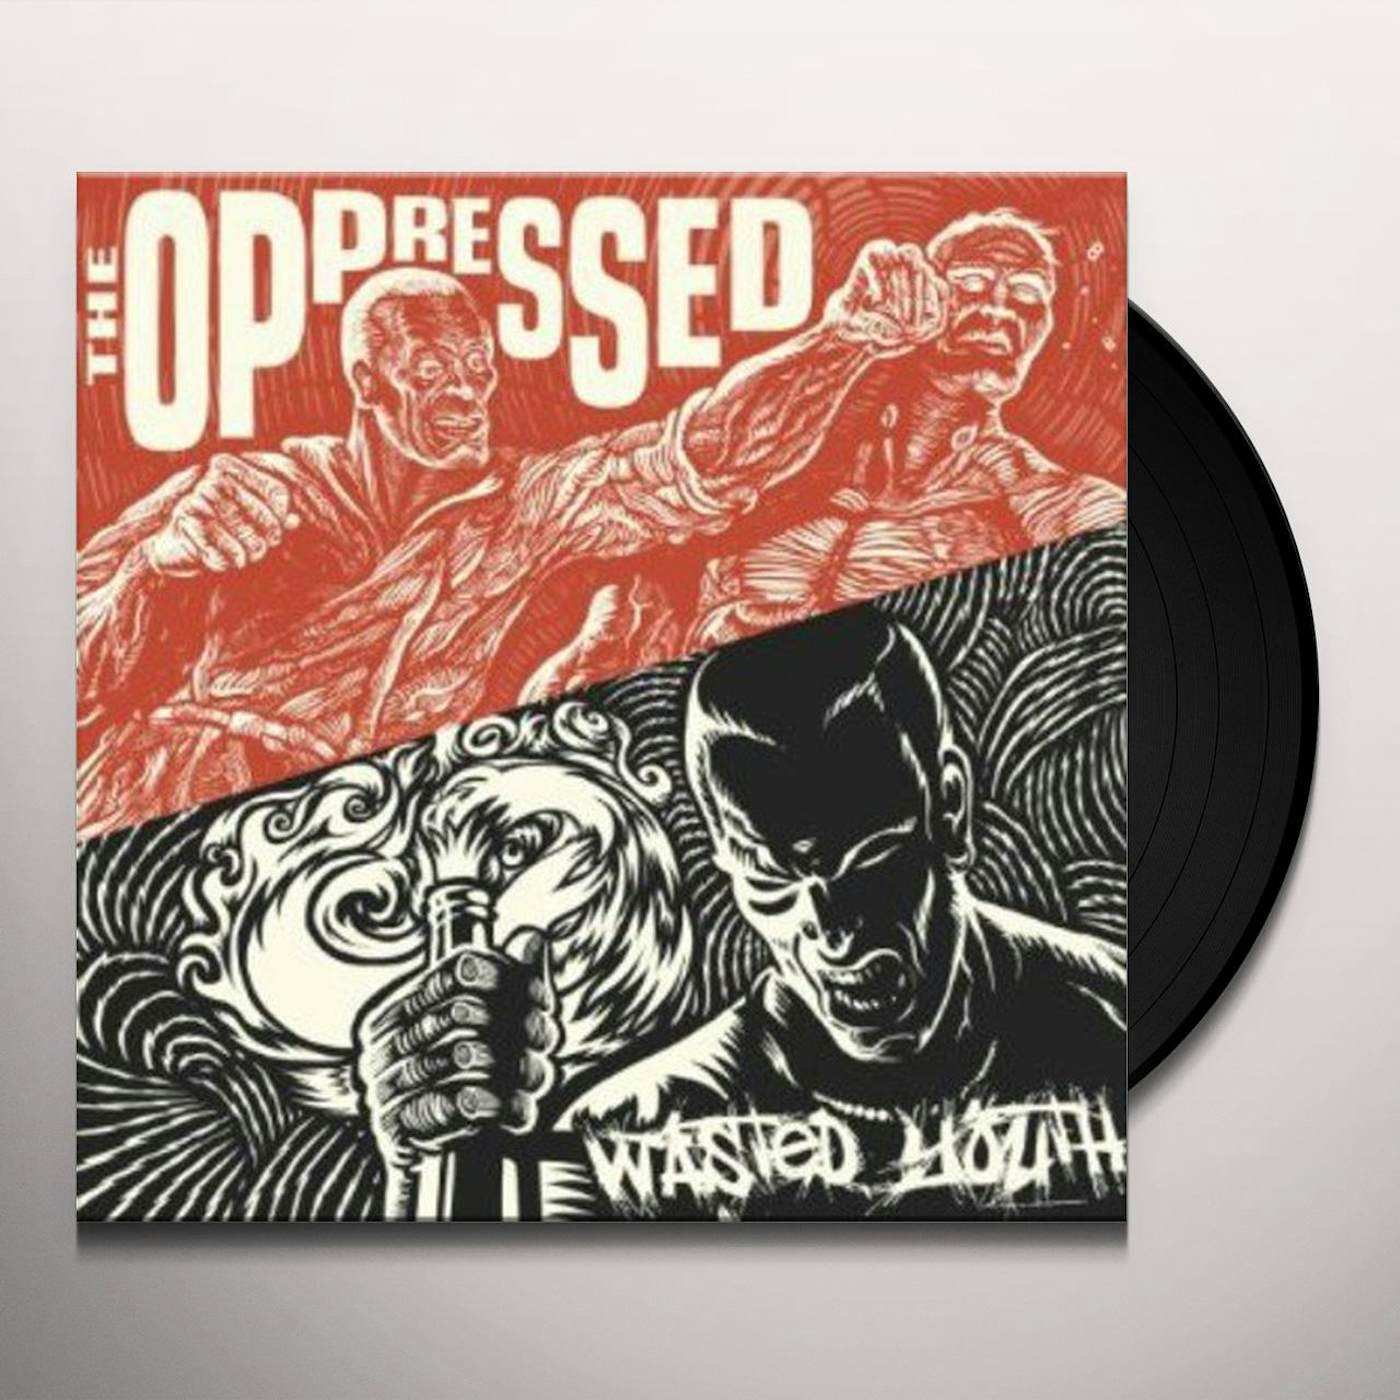 Oppressed/Wasted You 2 GENERATIONS 1 MESSAGE Vinyl Record